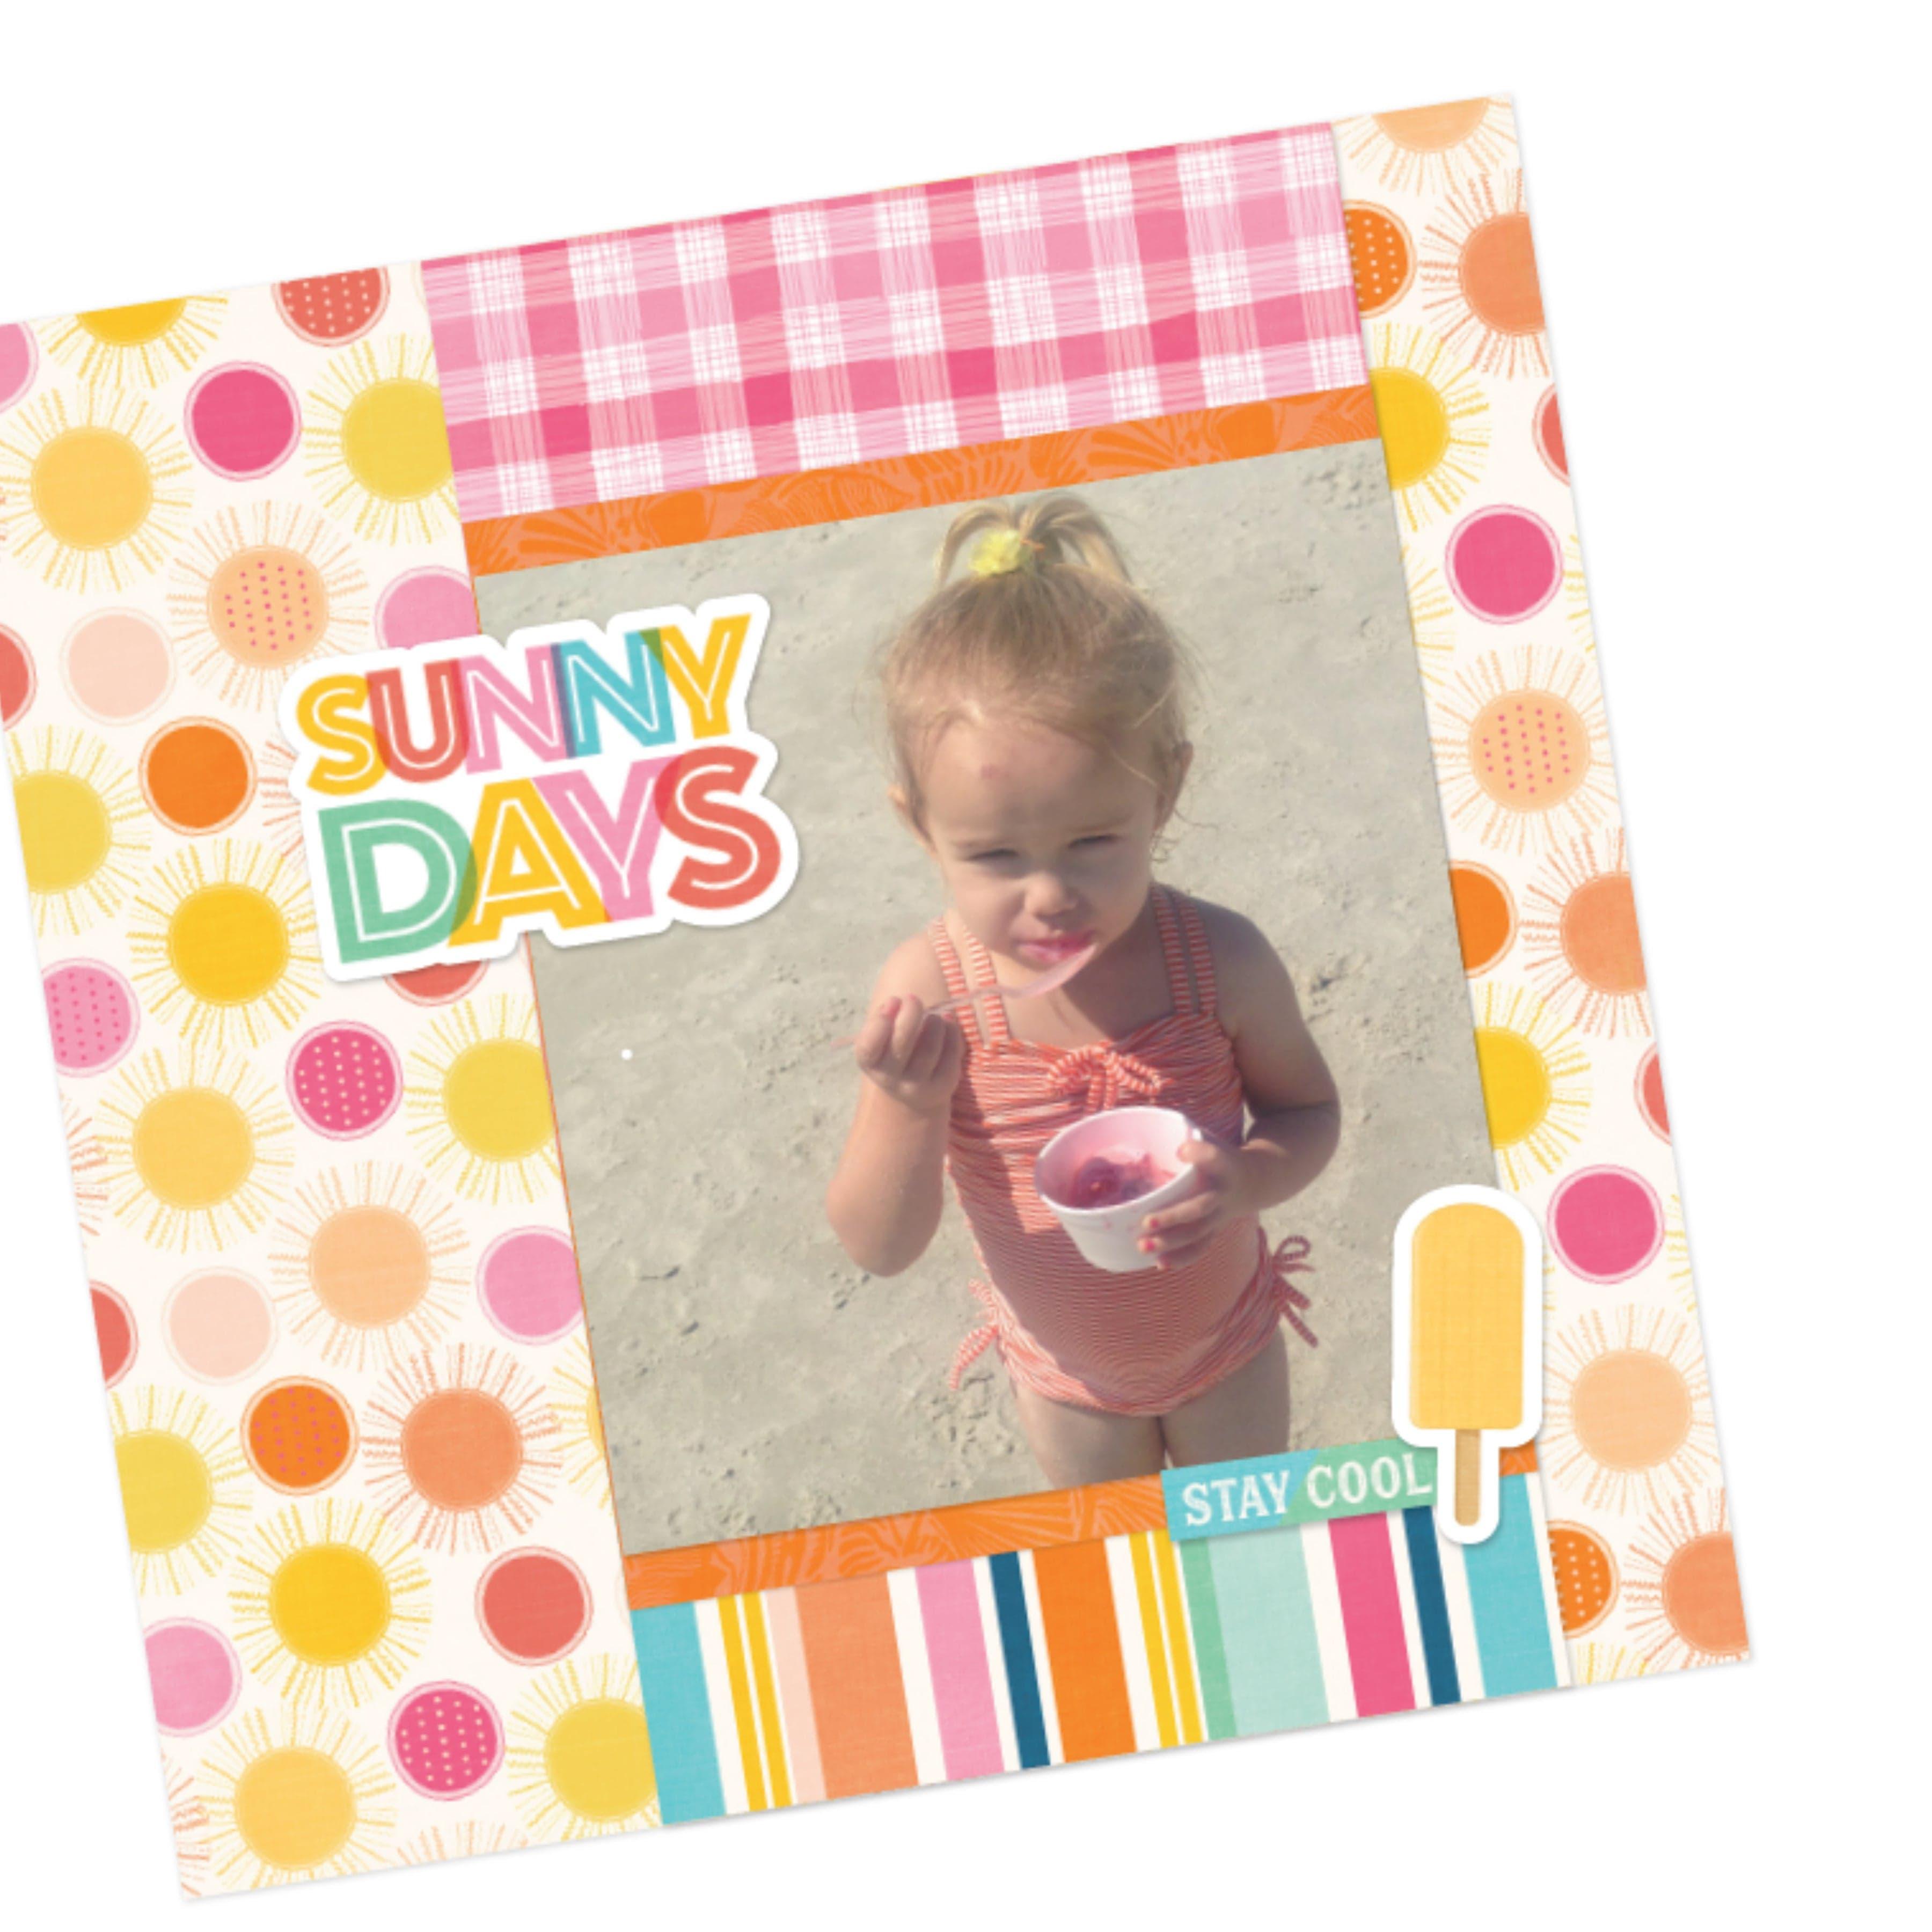 Sweet Sunshine Collection 12 x 12 Scrapbook Collection Kit by Photo Play Paper - Scrapbook Supply Companies